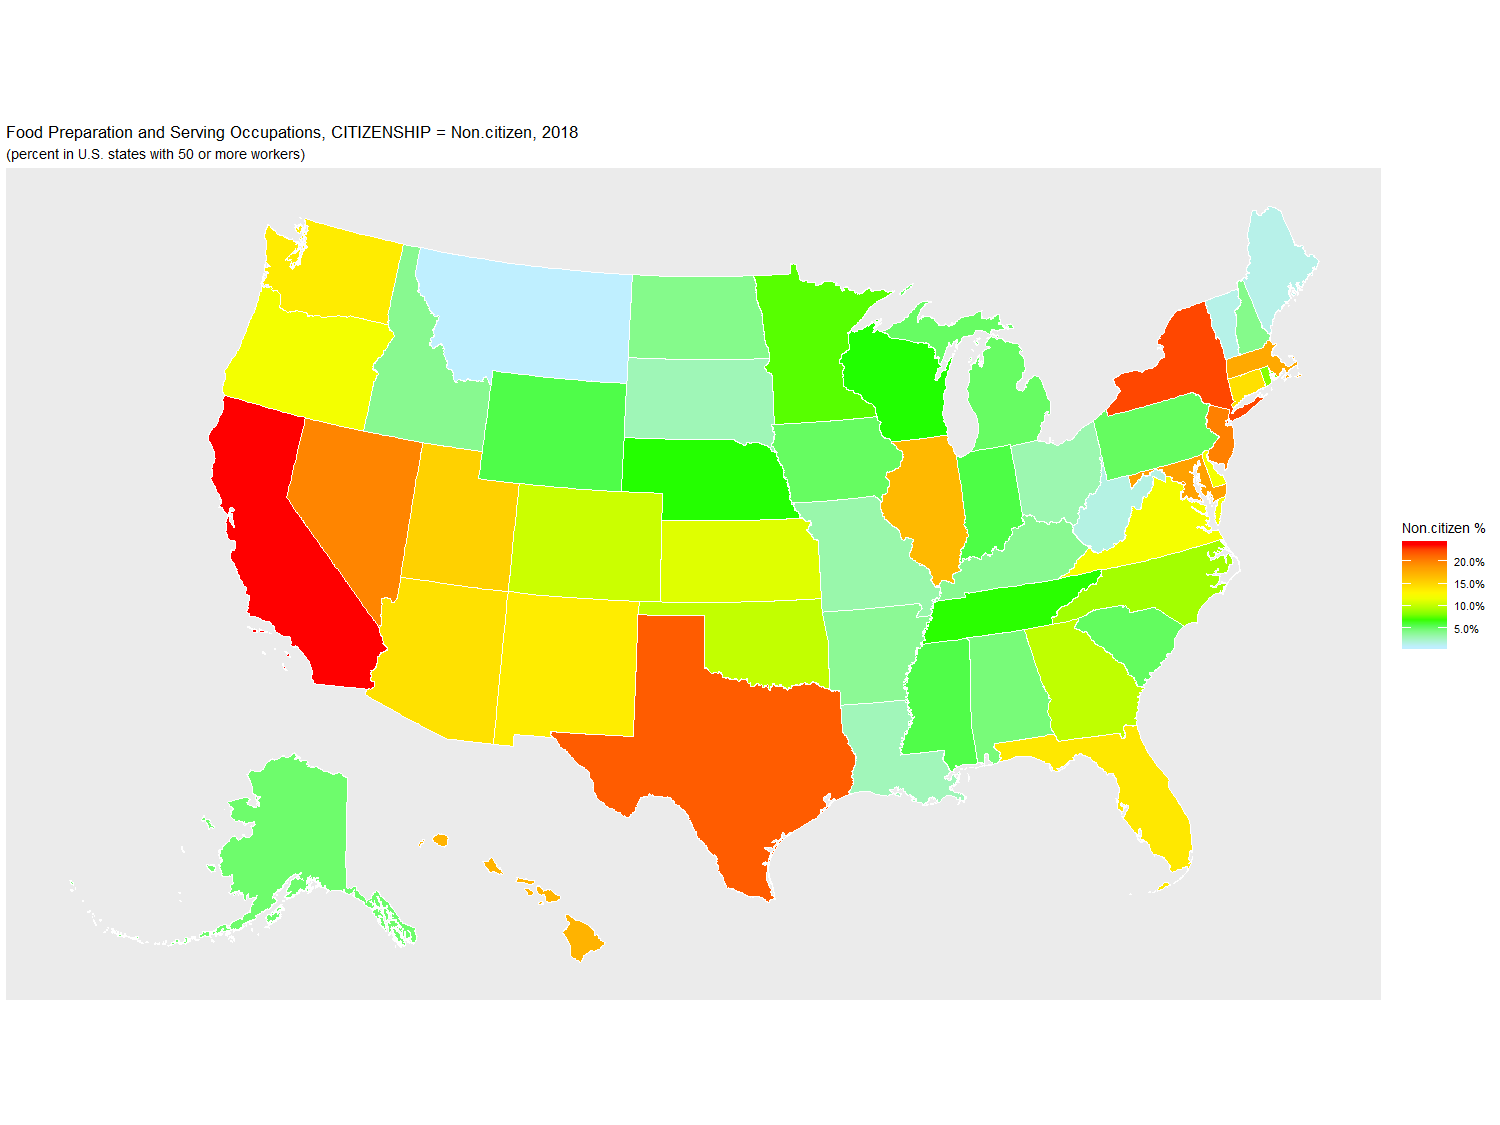 Non-citizen Percentage of Food Preparation and Serving Occupations by U.S. State, 2018